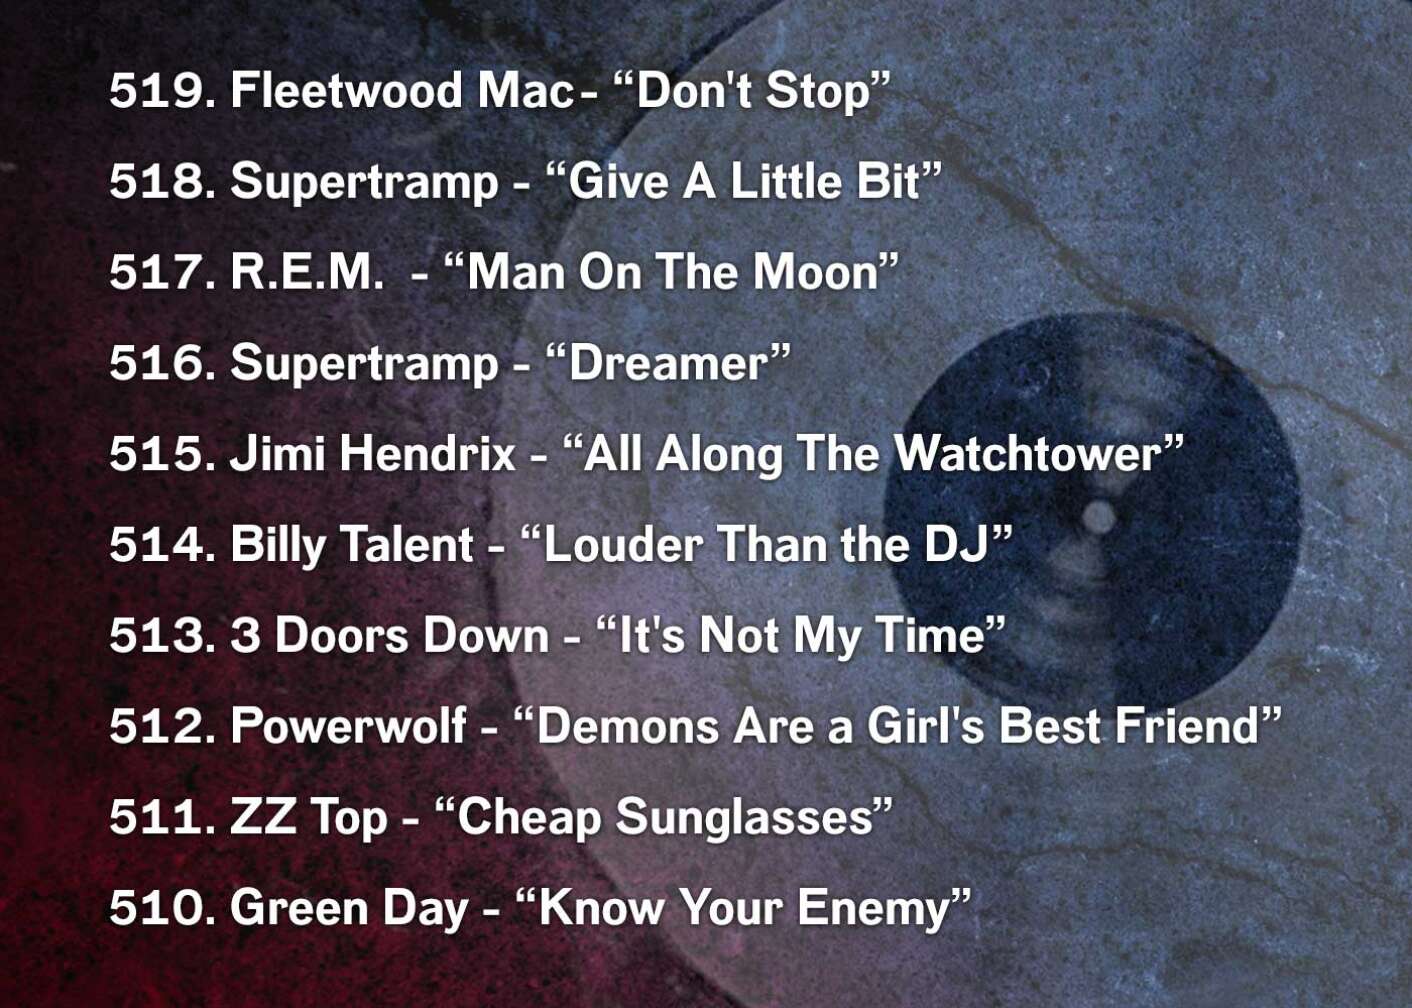 519. Fleetwood Mac	- “Don't Stop” 518. Supertramp - “Give A Little Bit” 517. R.E.M.	 - “Man On The Moon” 516. Supertramp - “Dreamer” 515. Jimi Hendrix - “All Along The Watchtower” 514. Billy Talent - “Louder Than the DJ” 513. 3 Doors Down - “It's Not My Time” 512. Powerwolf - “Demons Are a Girl's Best Friend” 511. ZZ Top - “Cheap Sunglasses” 510. Green Day - “Know Your Enemy”